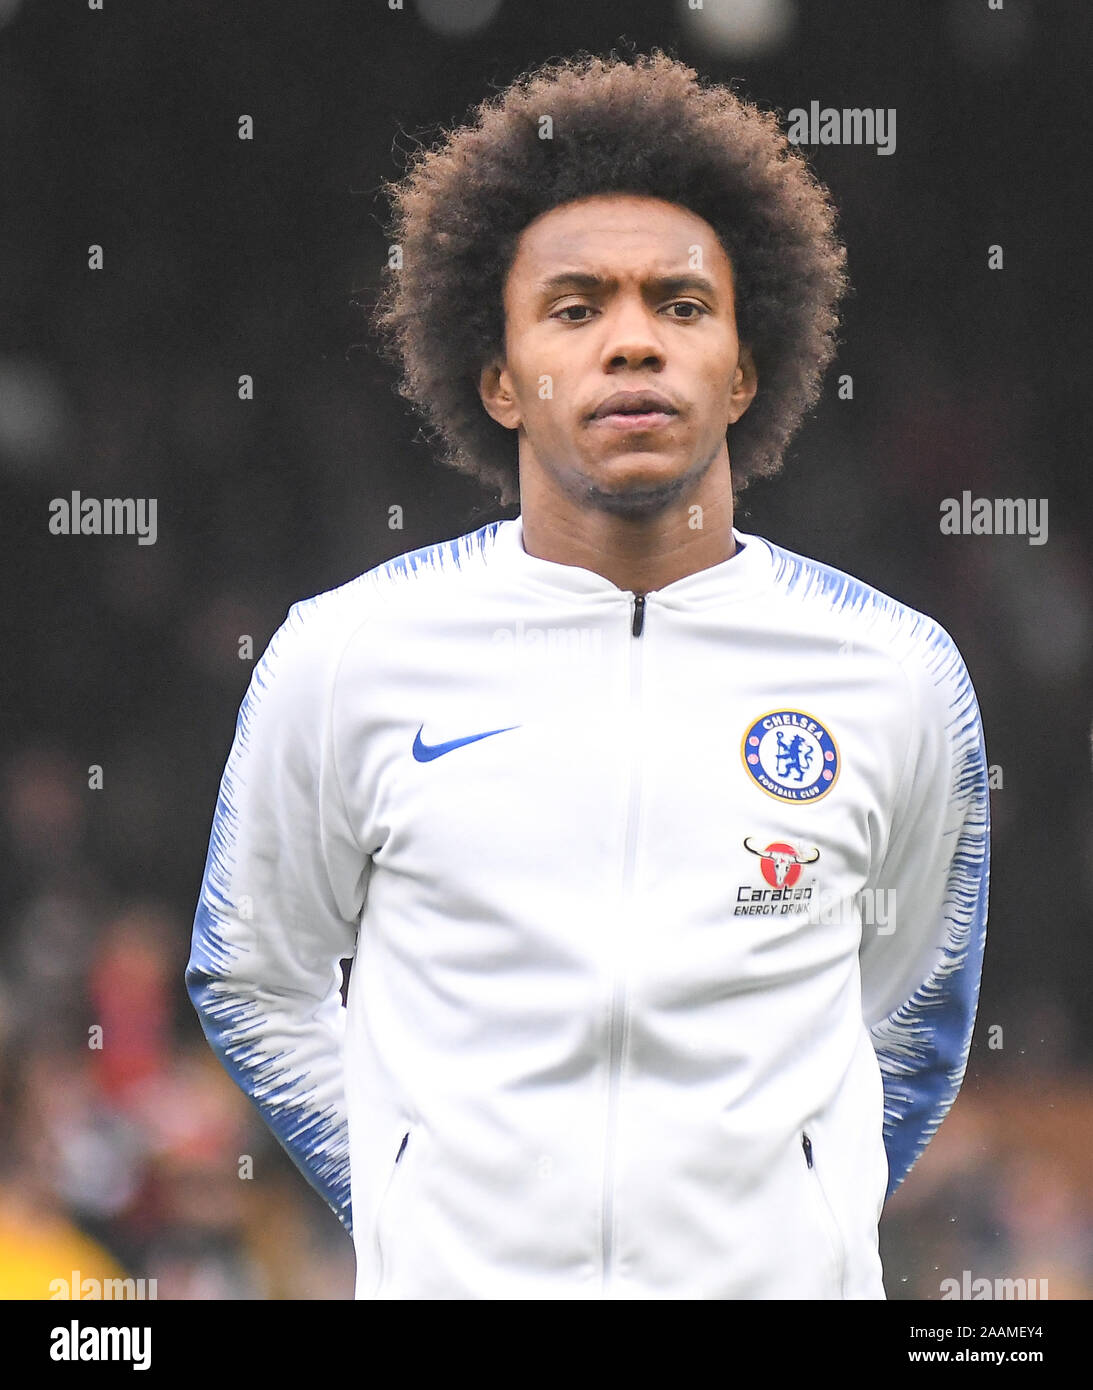 LONDON, ENGLAND - MARCH 3, 2019: Willian Borges da Silva of Chelsea pictured ahead of the 2018/19 Premier League game between Fulham FC and Chelsea FC at Craven Cottage. Stock Photo